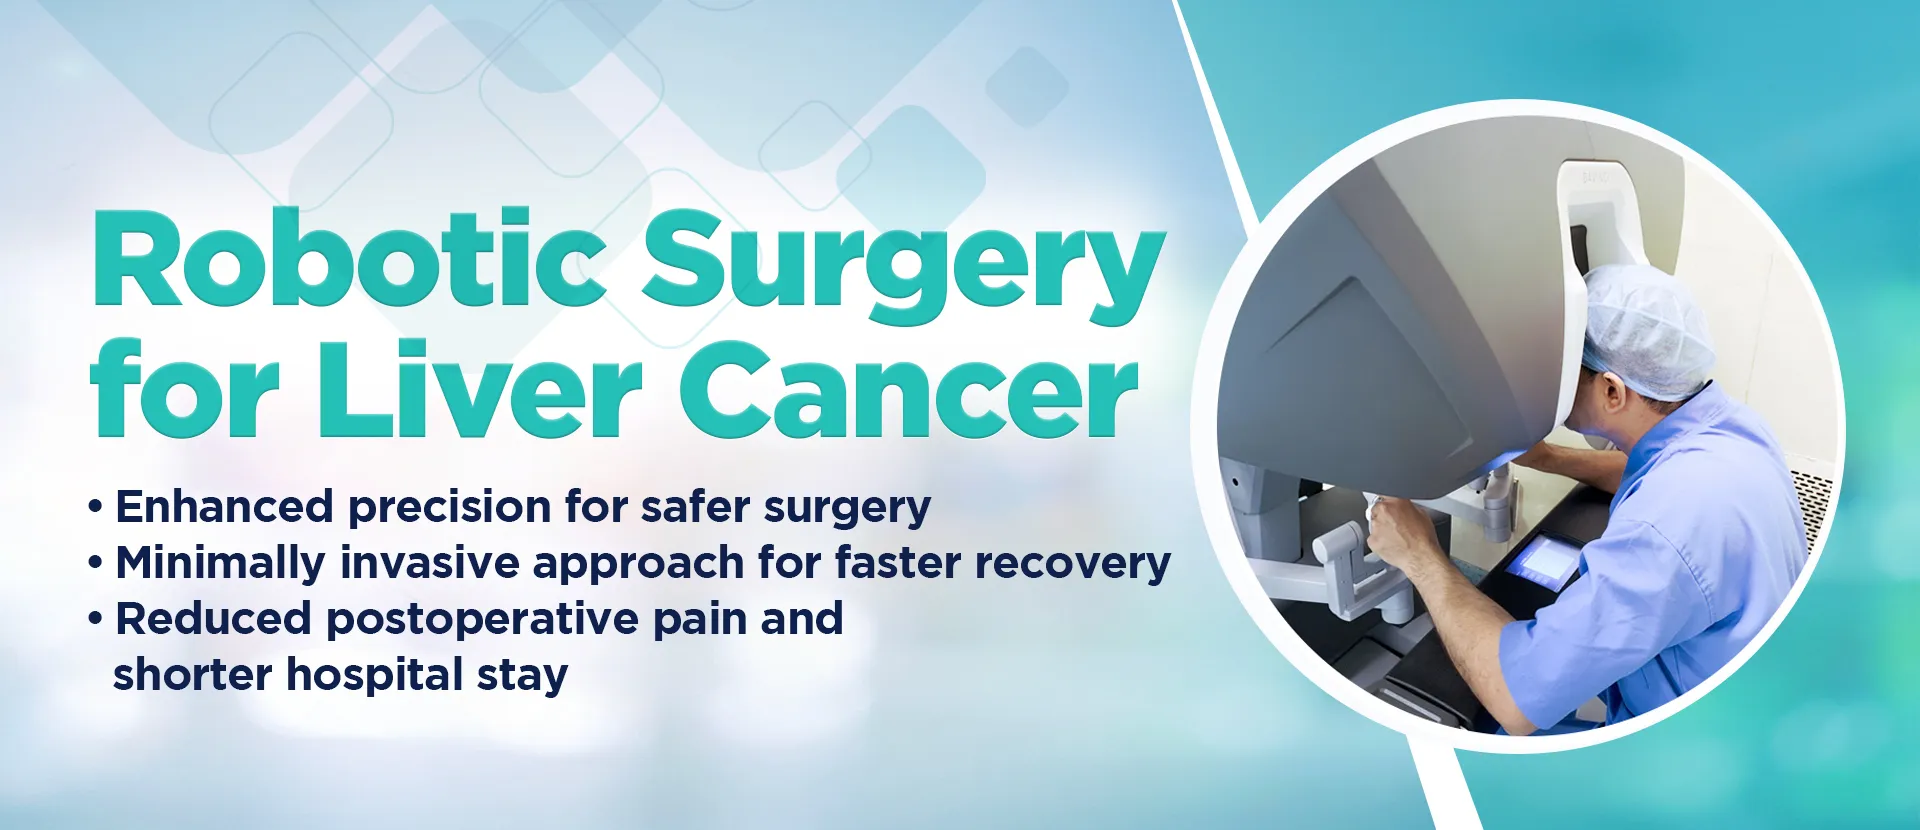 Robotic surgery for liver cancer in Ahmedabad, India